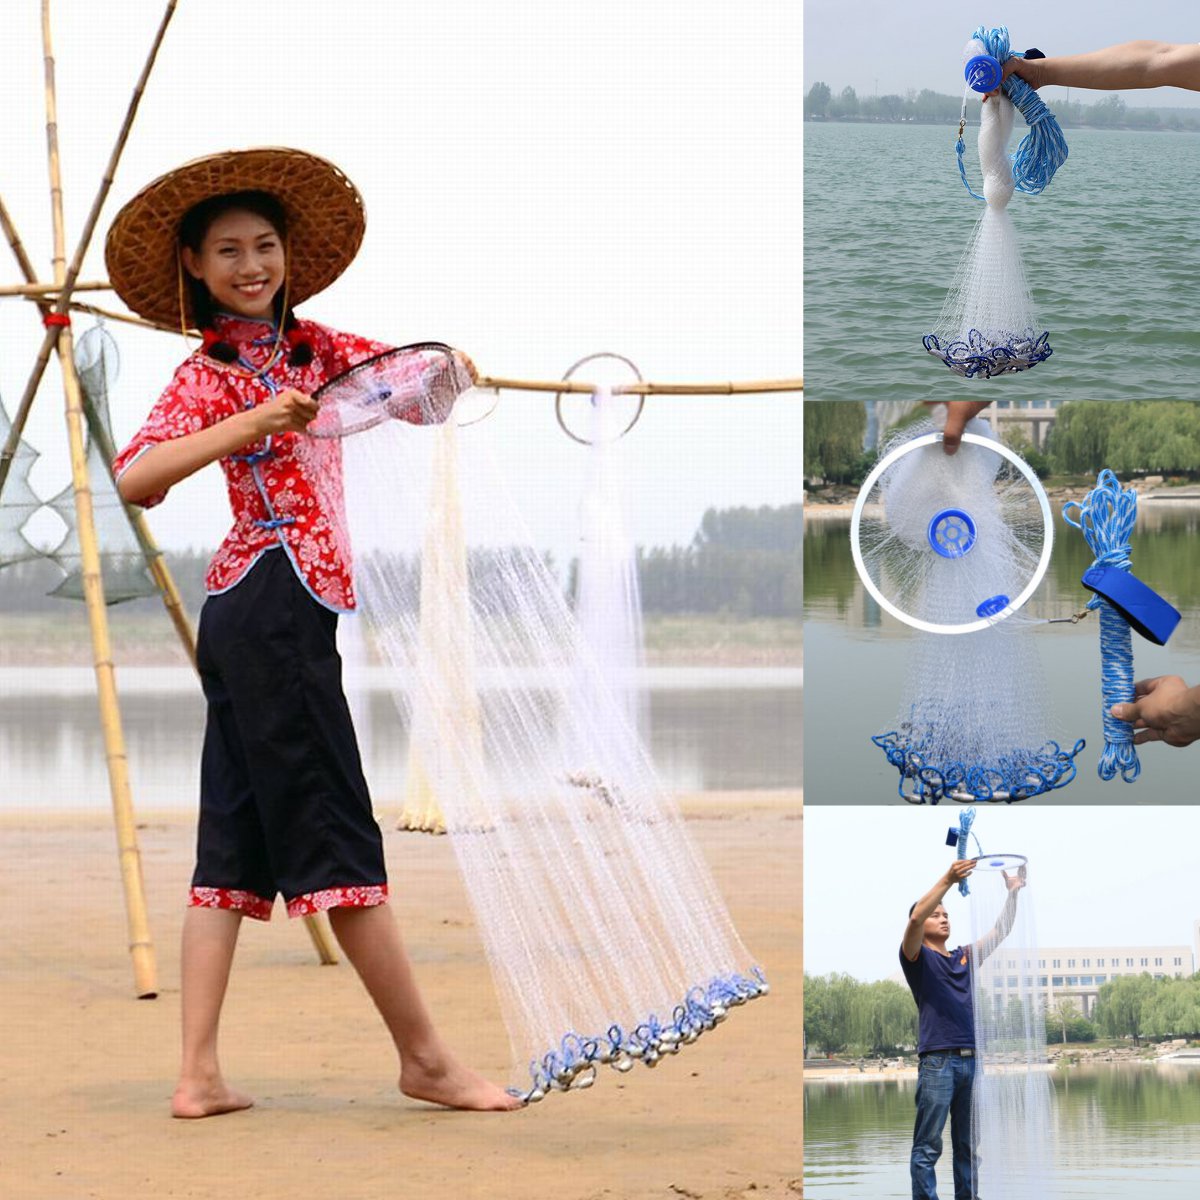 3M-Hand-Throw-Fishing-Net-Spin-Bait-Sign-Casting-Network-Hand-Sinker-Small-Mesh-1424630-1